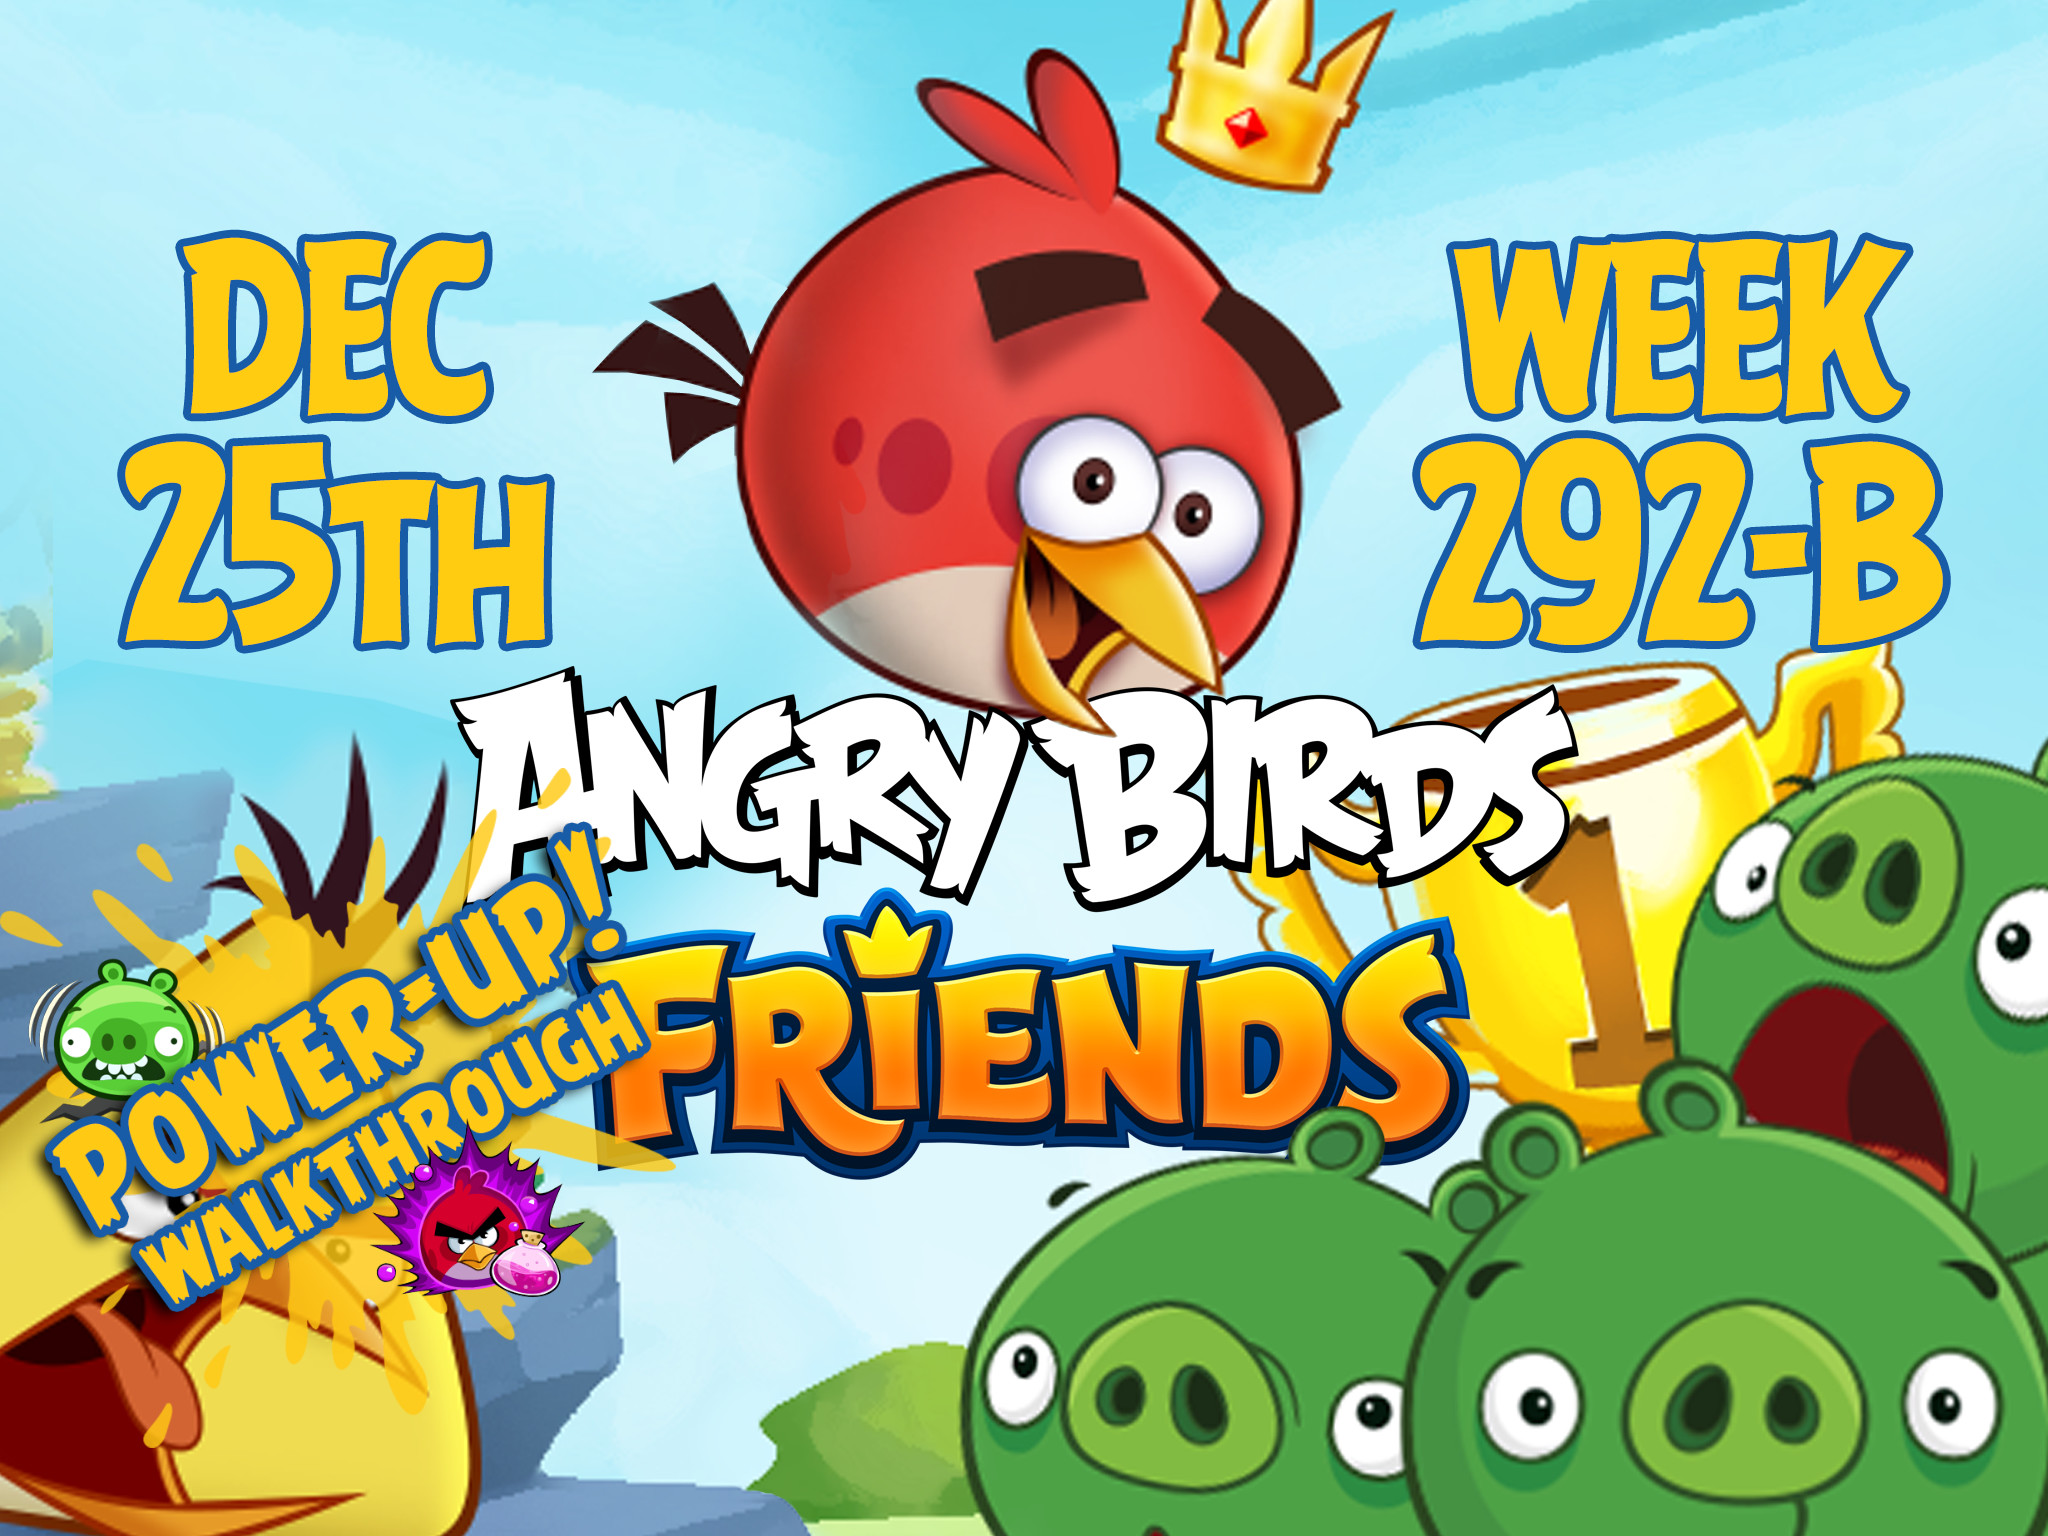 Angry Birds Friends Tournament Week 292-B Feature Image PU